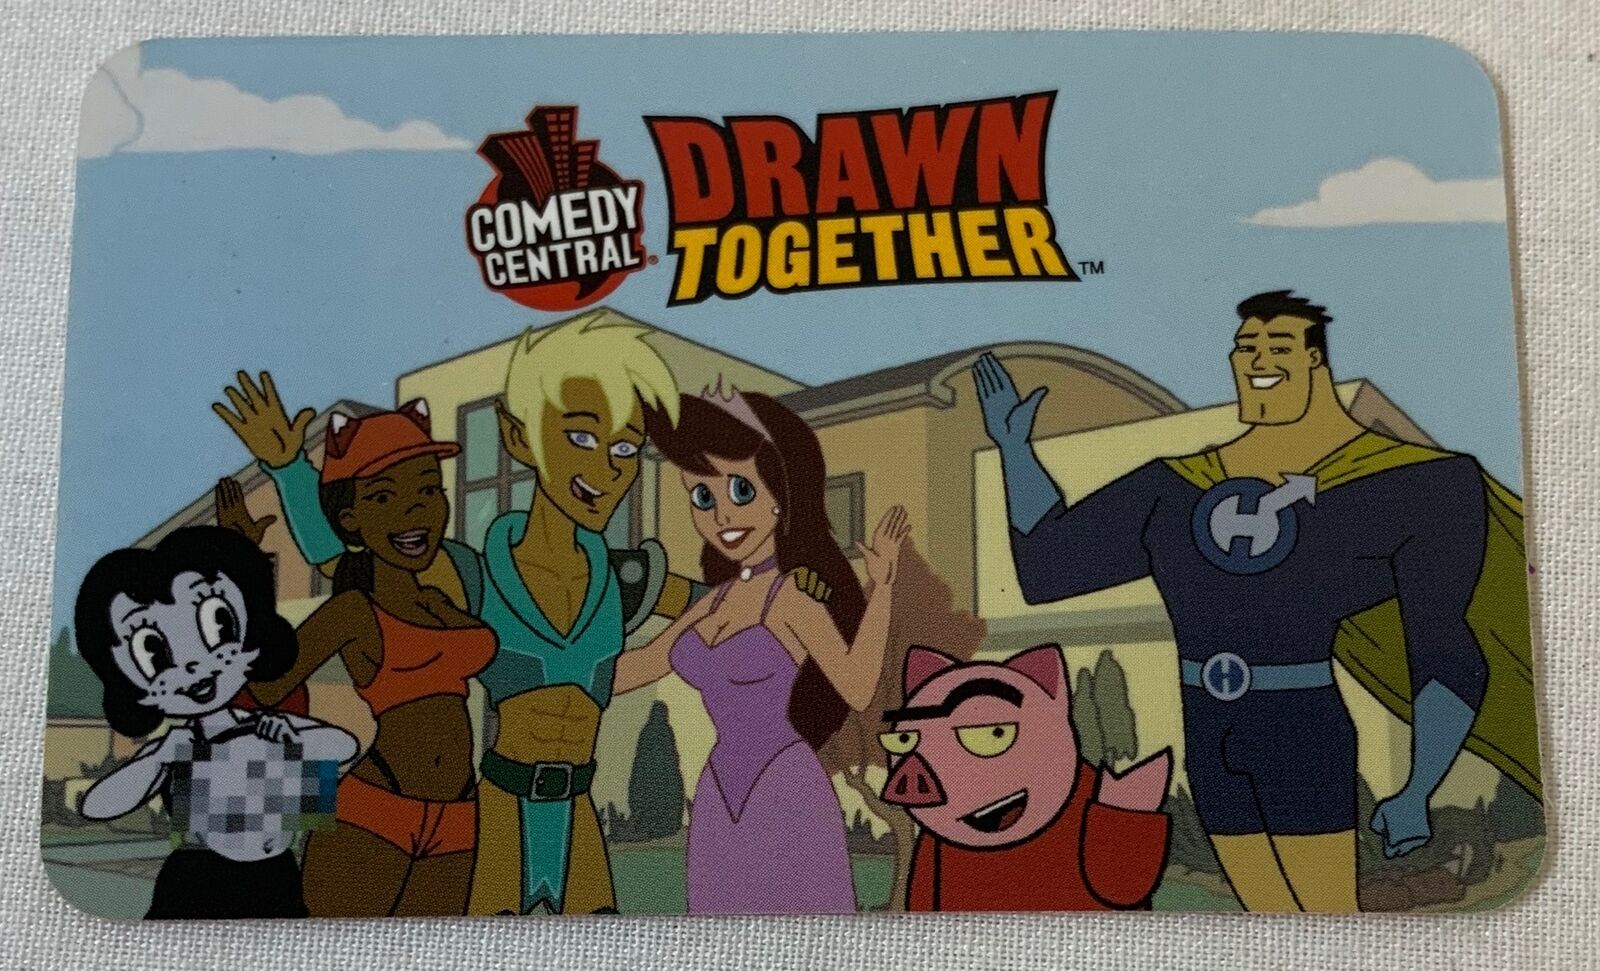 2004 Comedy Central DRAWN TOGETHER promo clip download card